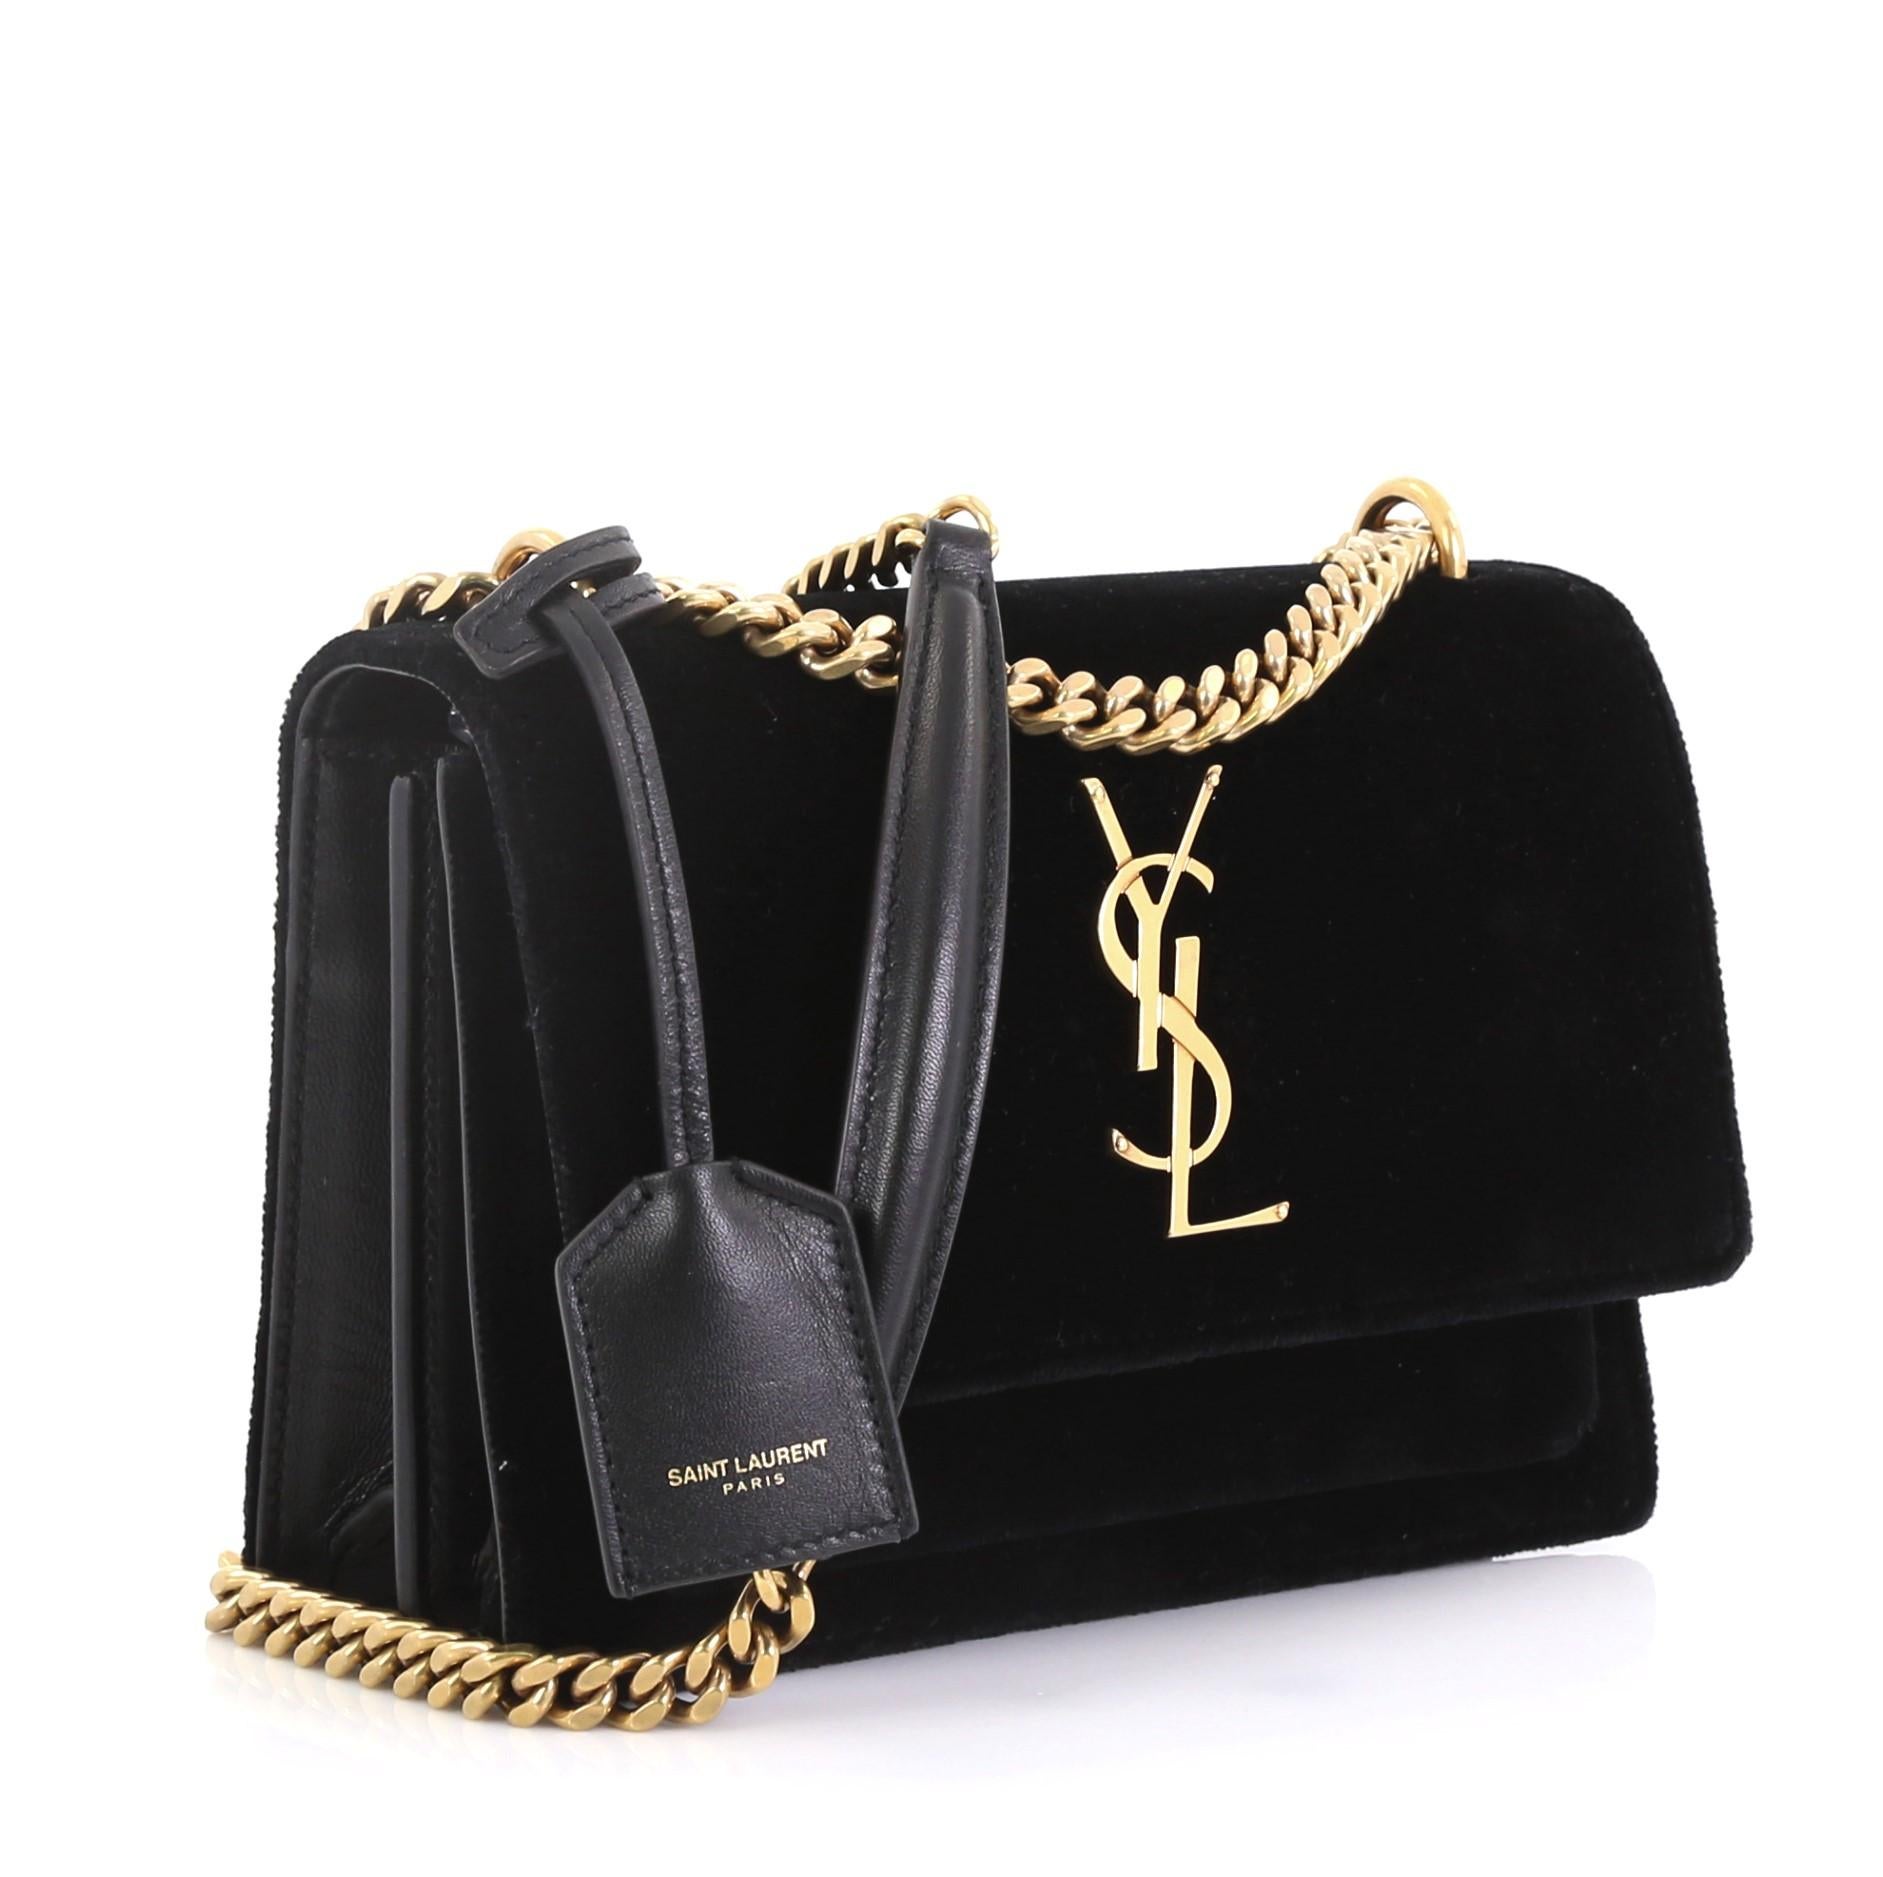 This Saint Laurent Sunset Shoulder Bag Velvet Small, crafted in black velvet, features a chain link strap with leather pad, interlocking YSL logo at its center, and aged gold-tone hardware. Its magnetic snap button closure opens to a black leather